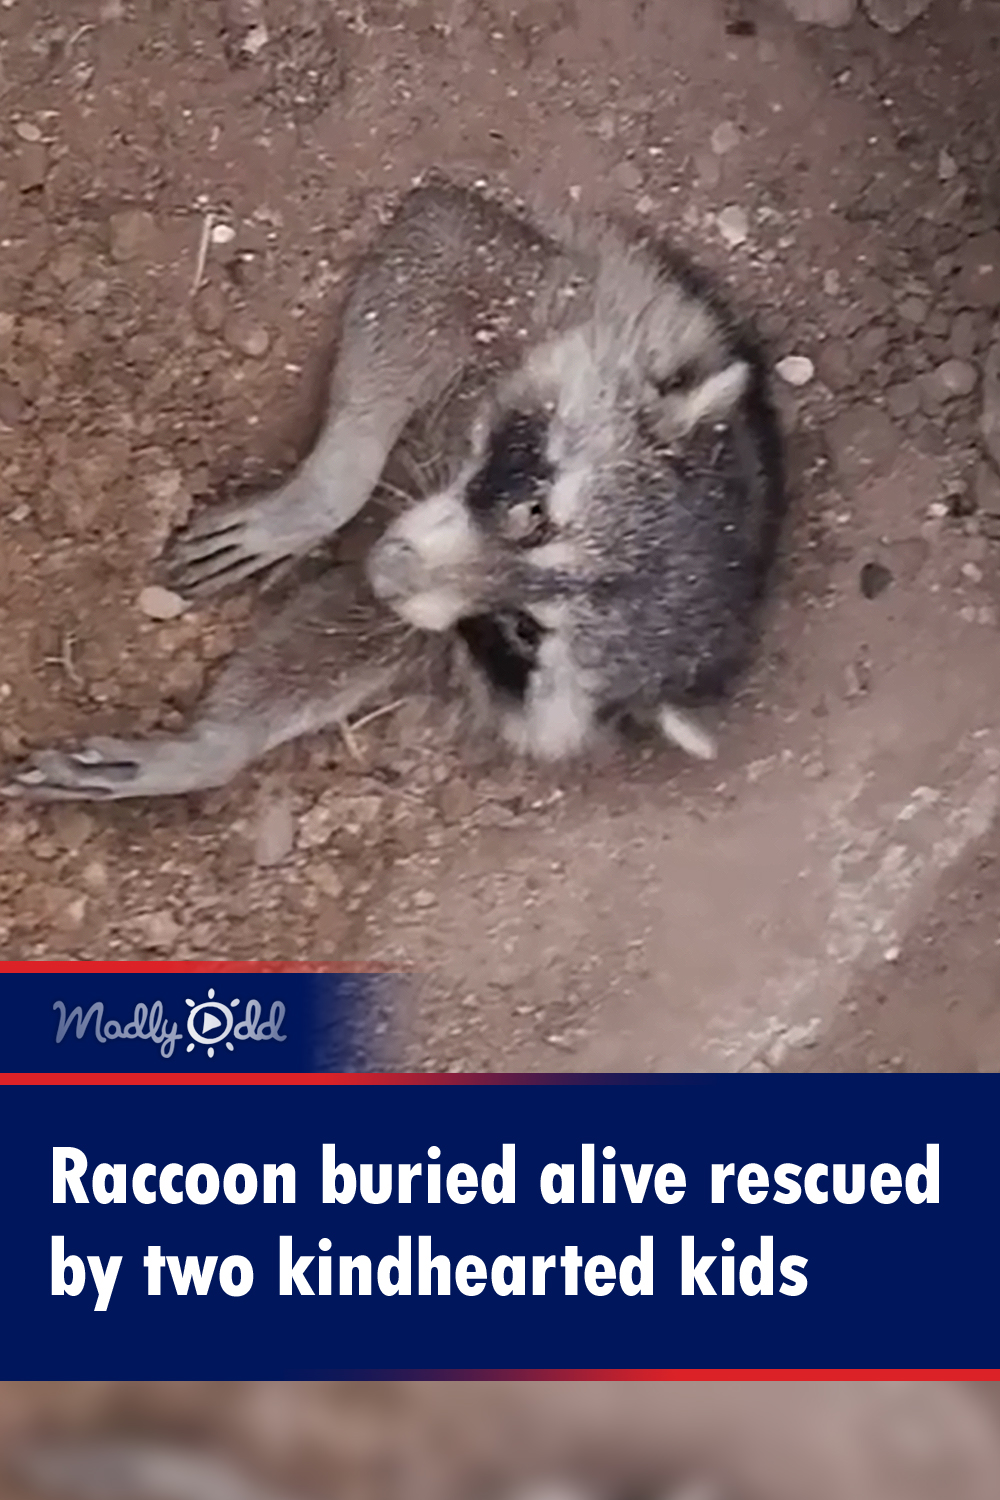 Raccoon buried alive rescued by two kindhearted kids